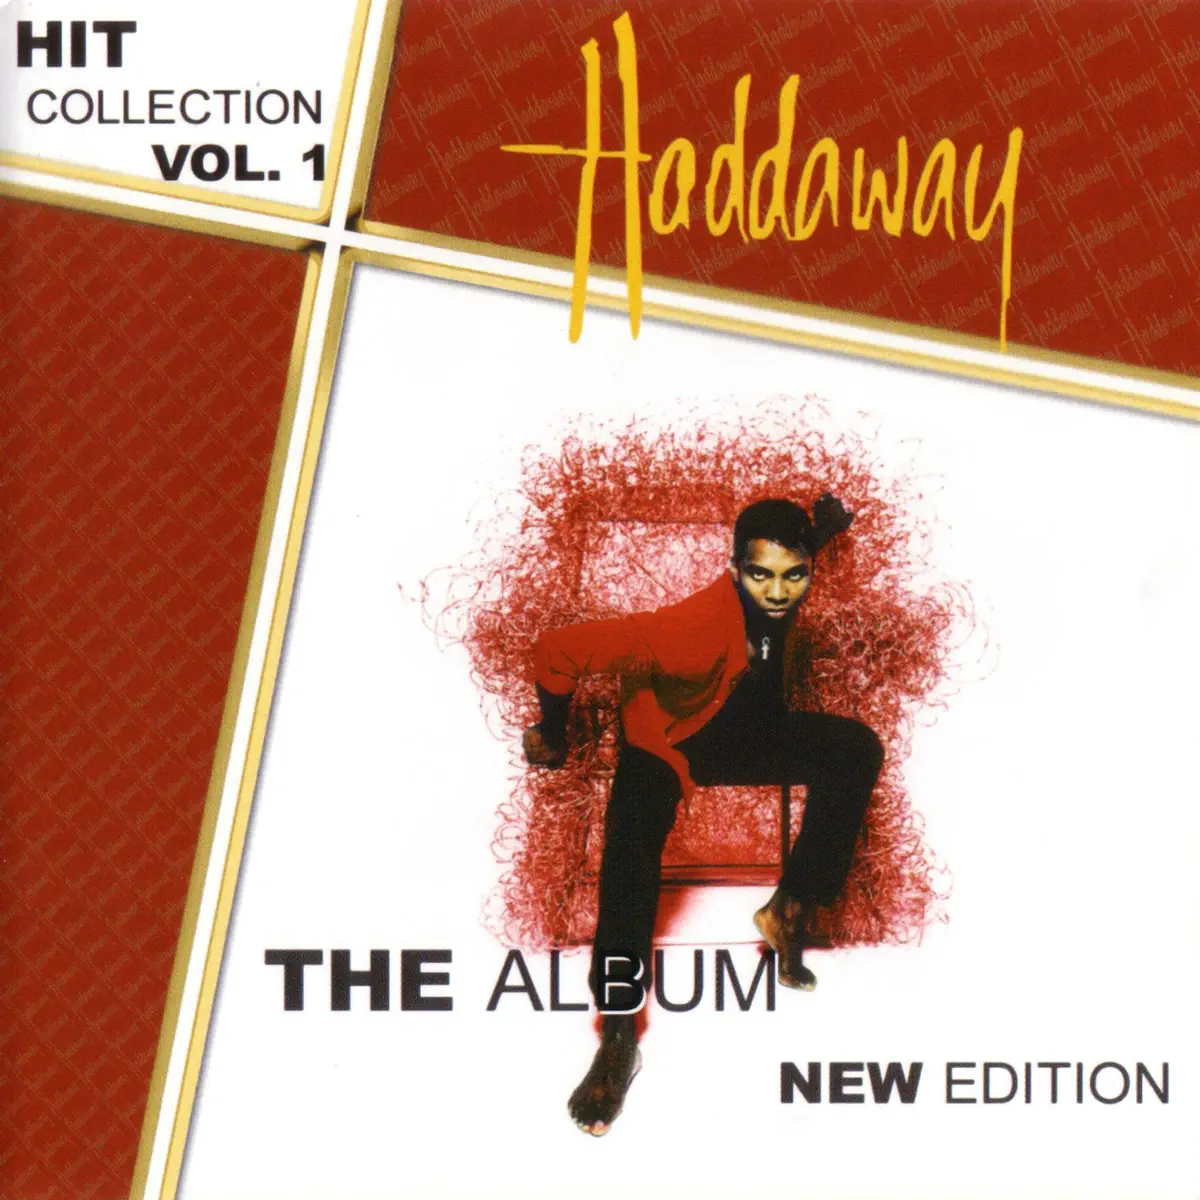 Haddaway - Hit Collection, Vol. 1 (New Edition) (2004) [iTunes Plus AAC M4A]-新房子